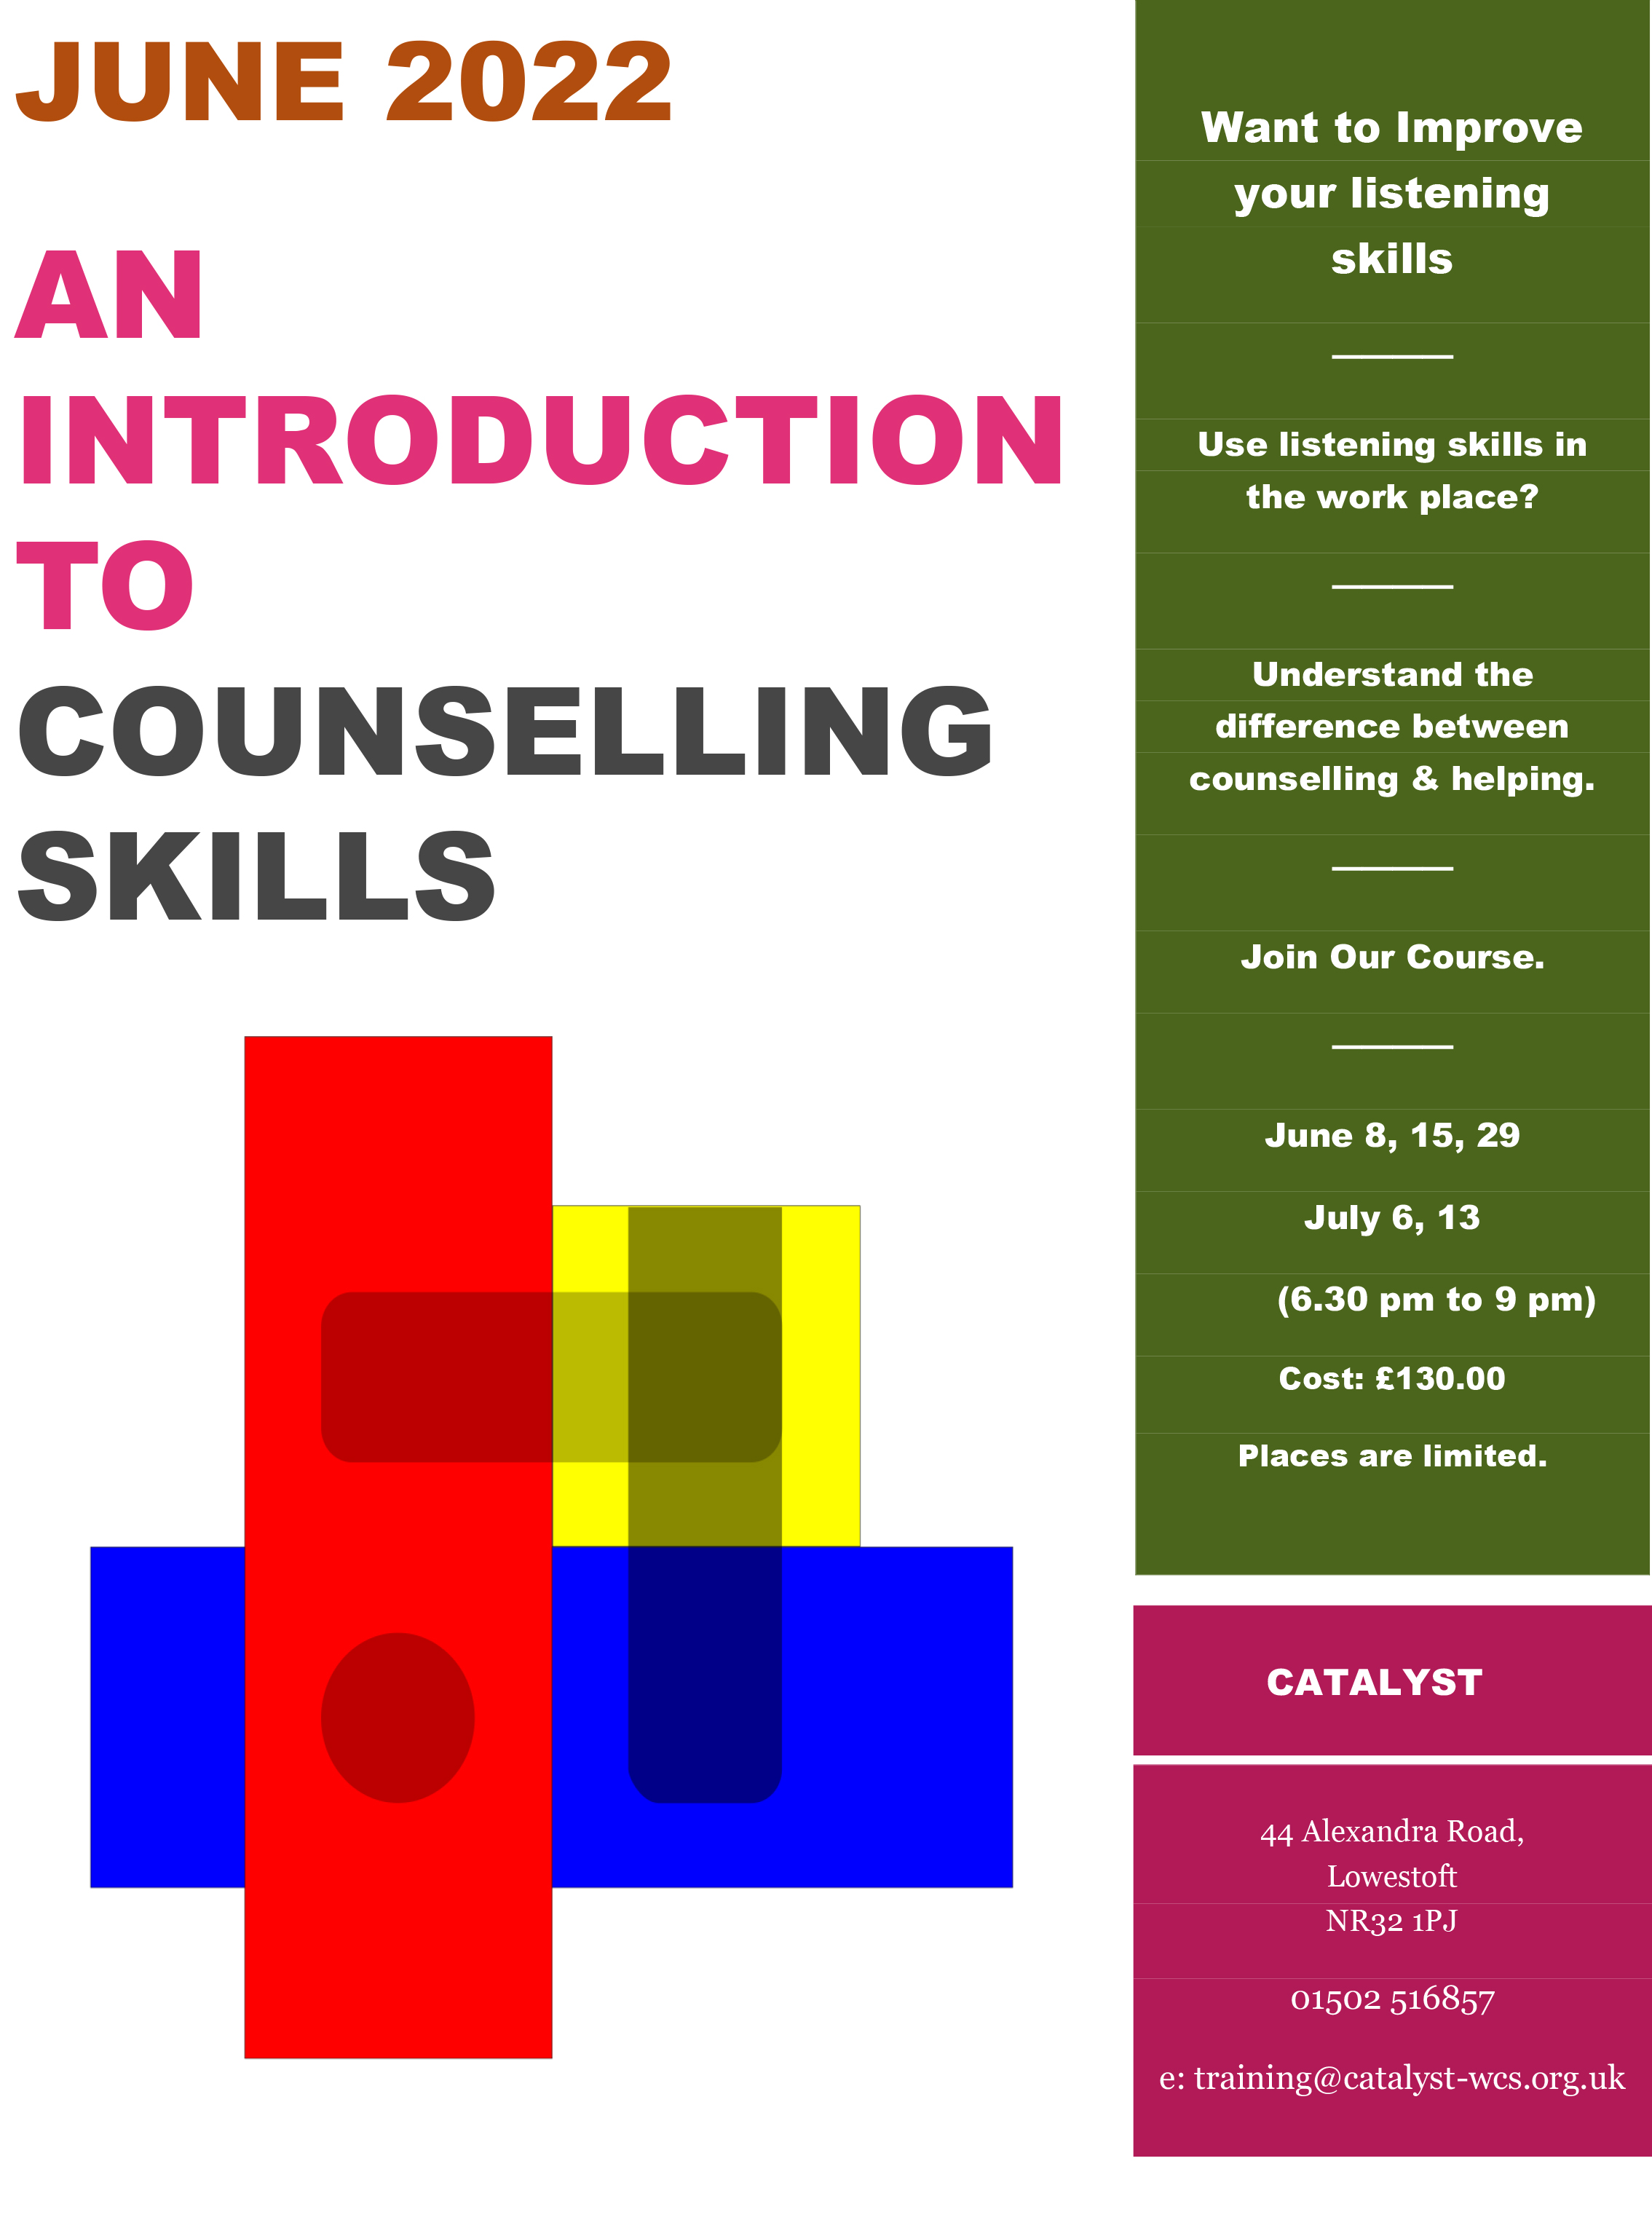 An Introduction to Counselling Skills